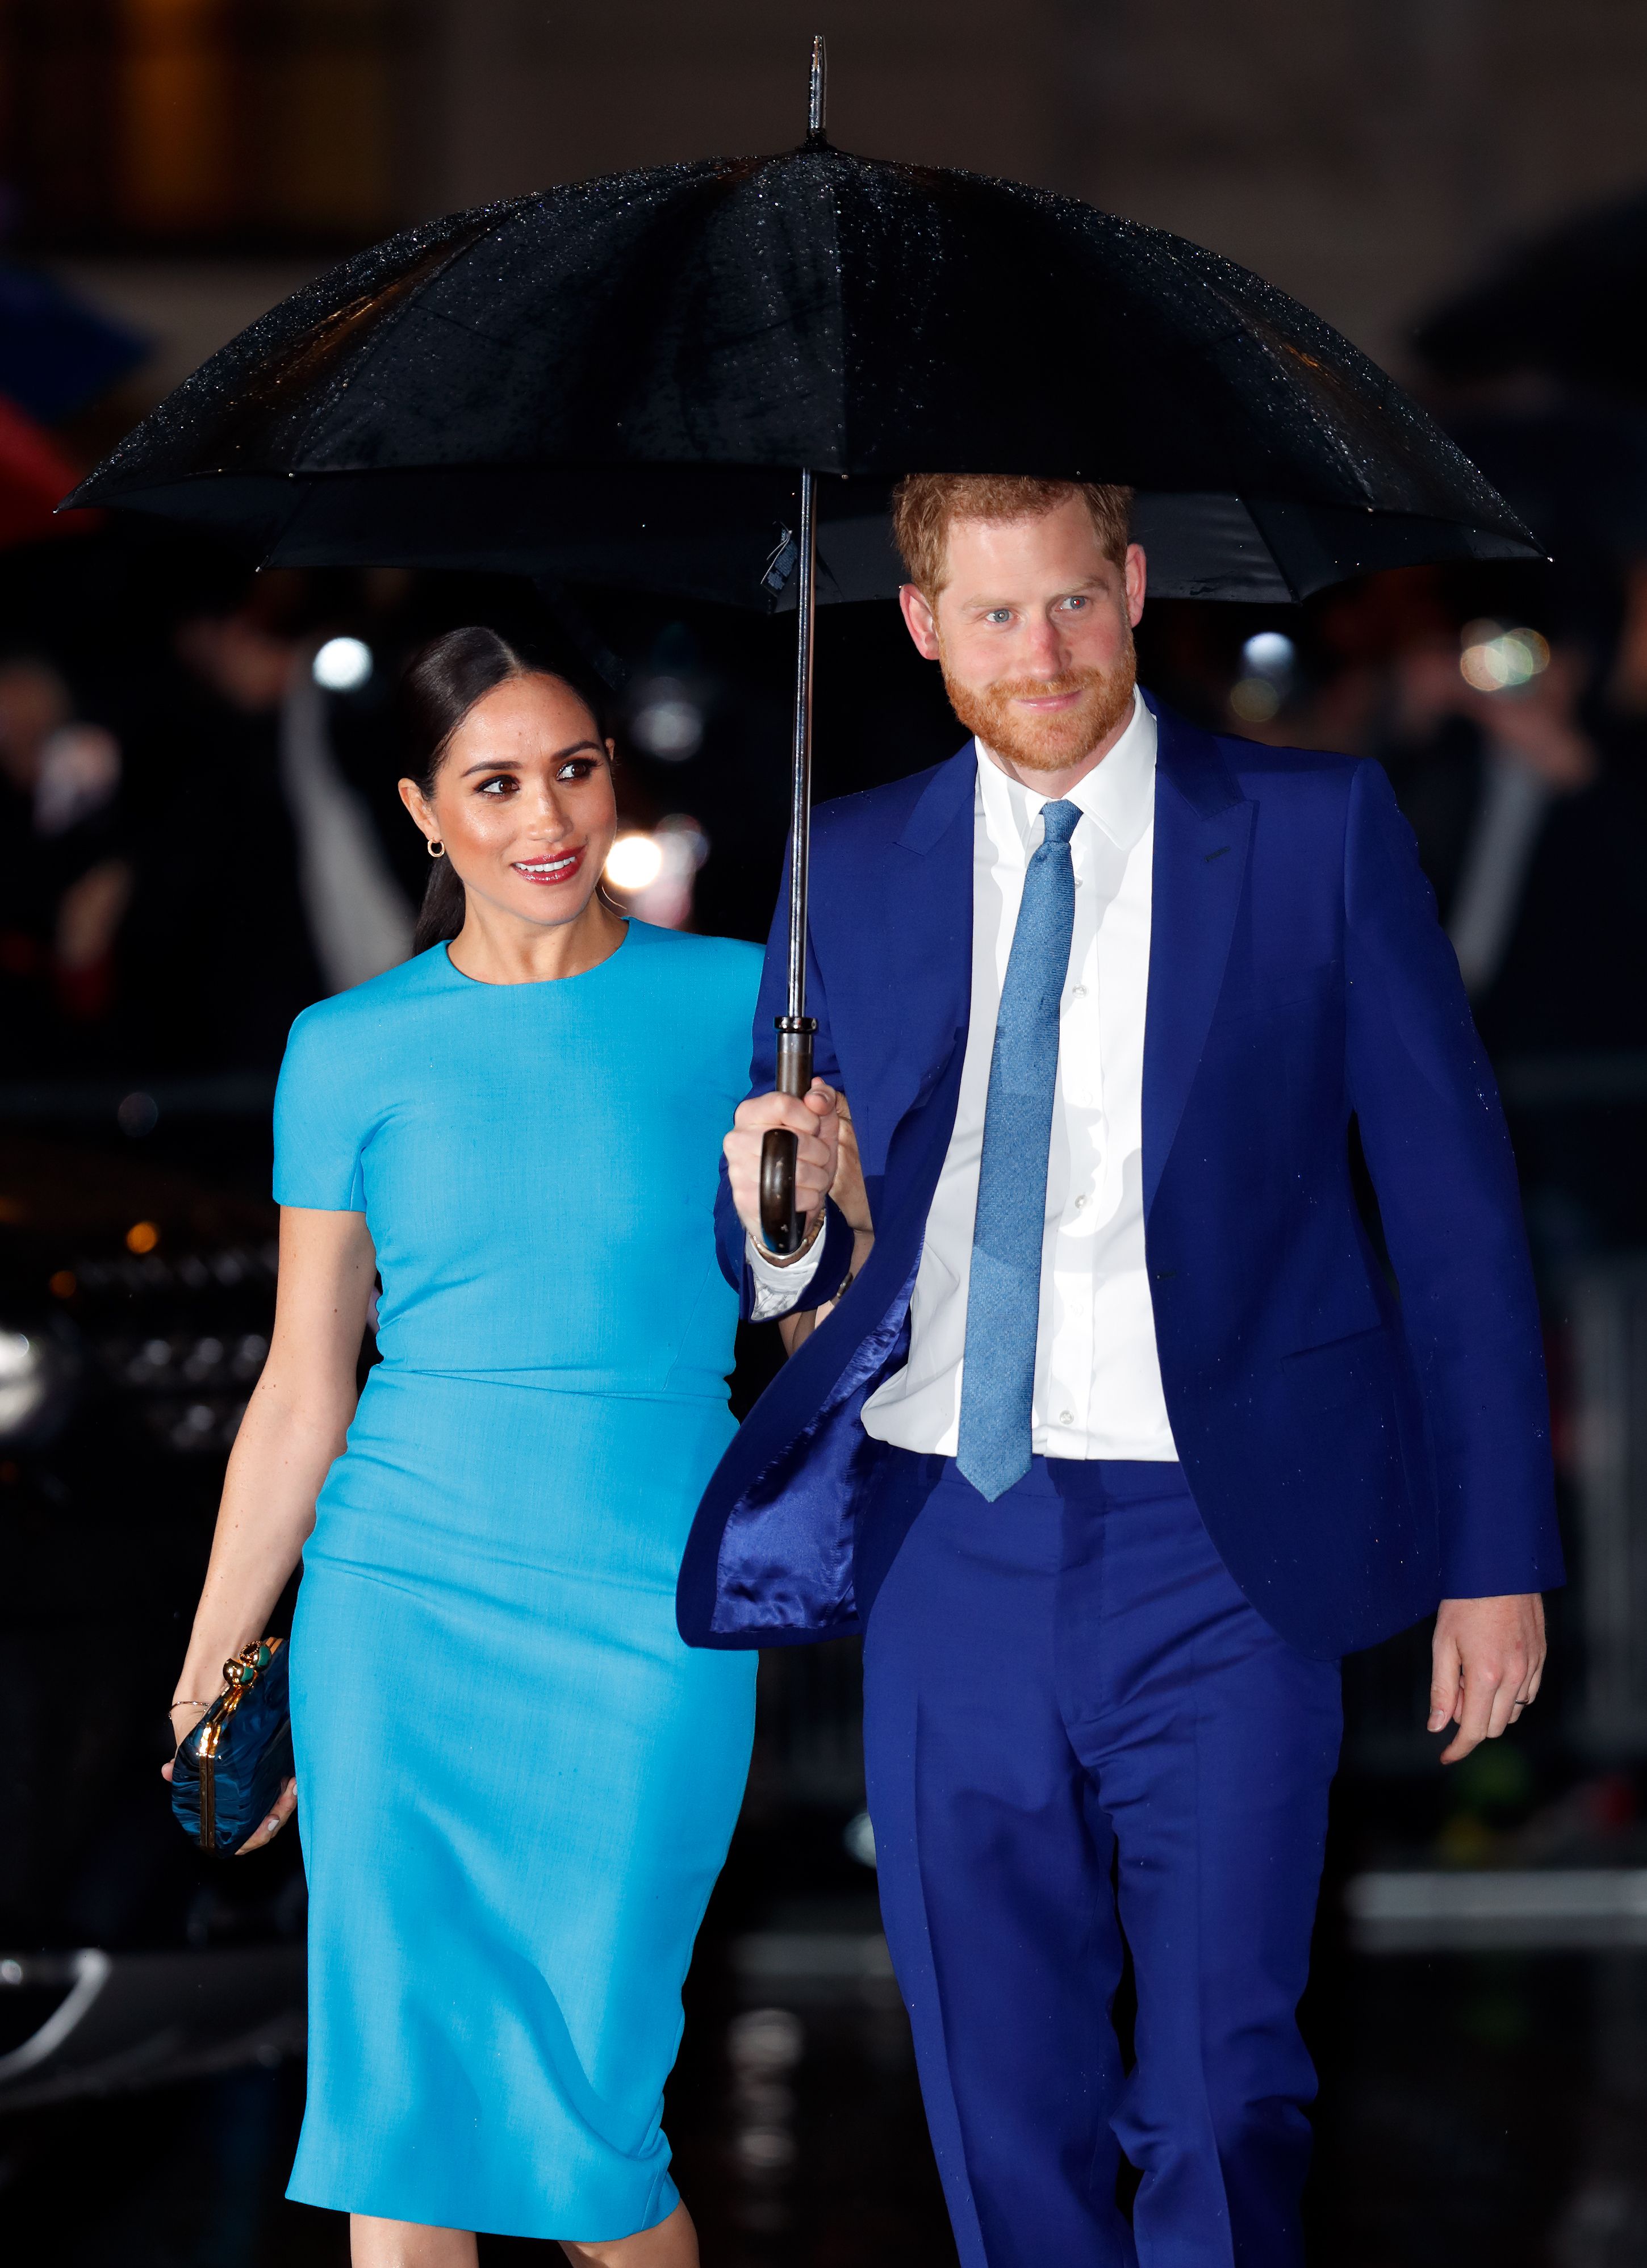 Duchess Meghan and Prince Harry at The Endeavour Fund Awards at Mansion House on March 5, 2020, in London, England | Photo: Max Mumby/Indigo/Getty Images